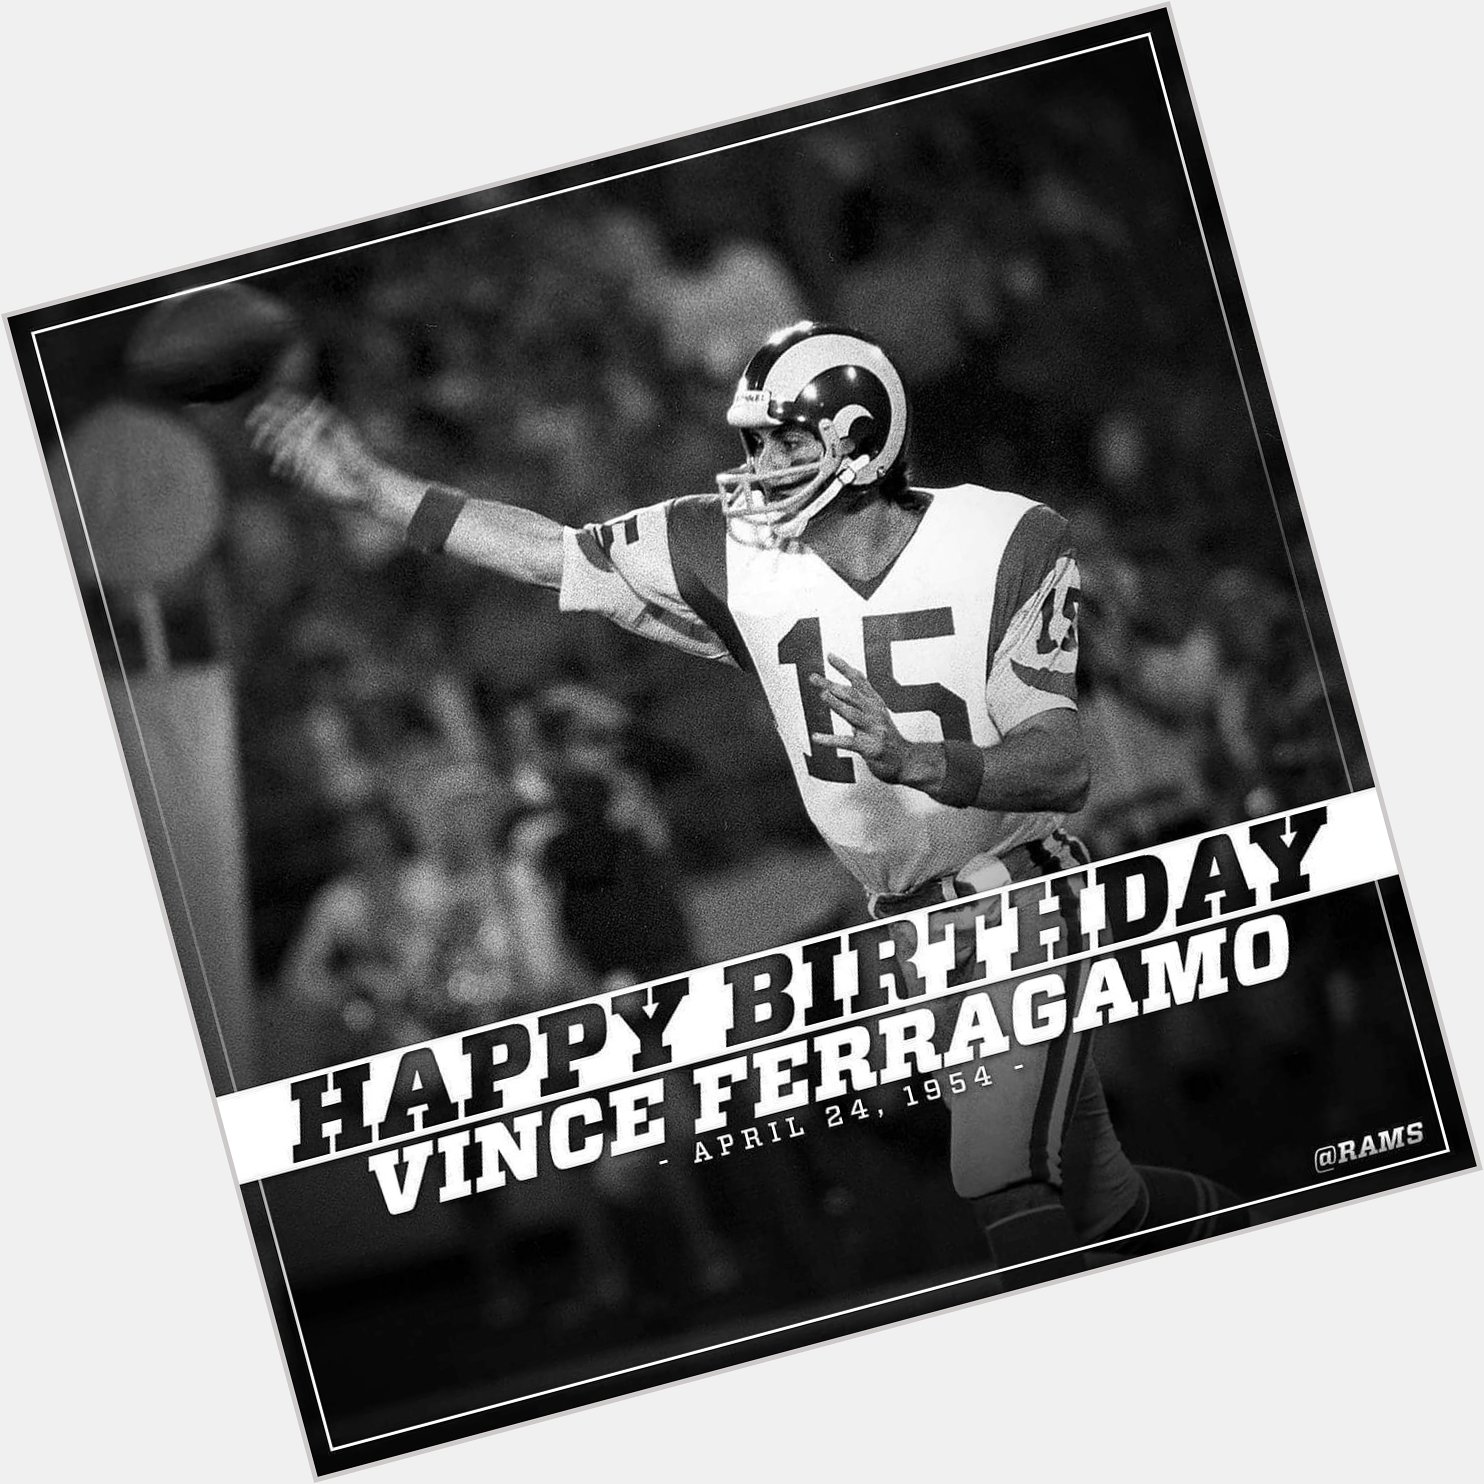 Happy birthday to one of my very favorite Rams players ever, Vince Ferragamo!  